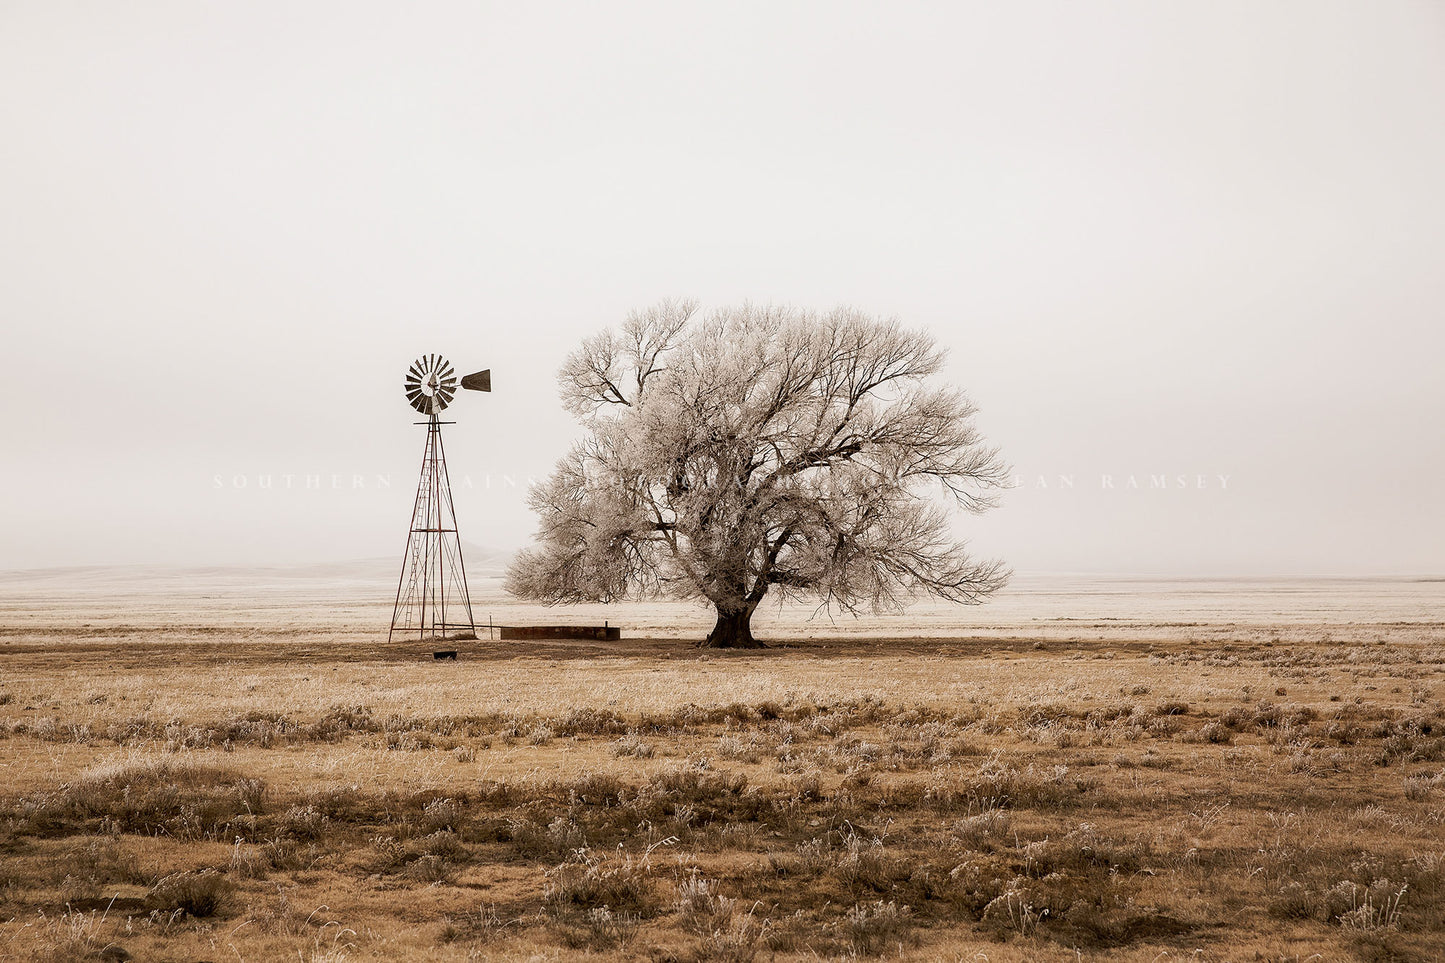   Country photography print of a tree and an old windmill covered in frost on a cold winter day on the plains of New Mexico in sepia tone by Sean Ramsey of Southern Plains Photography.